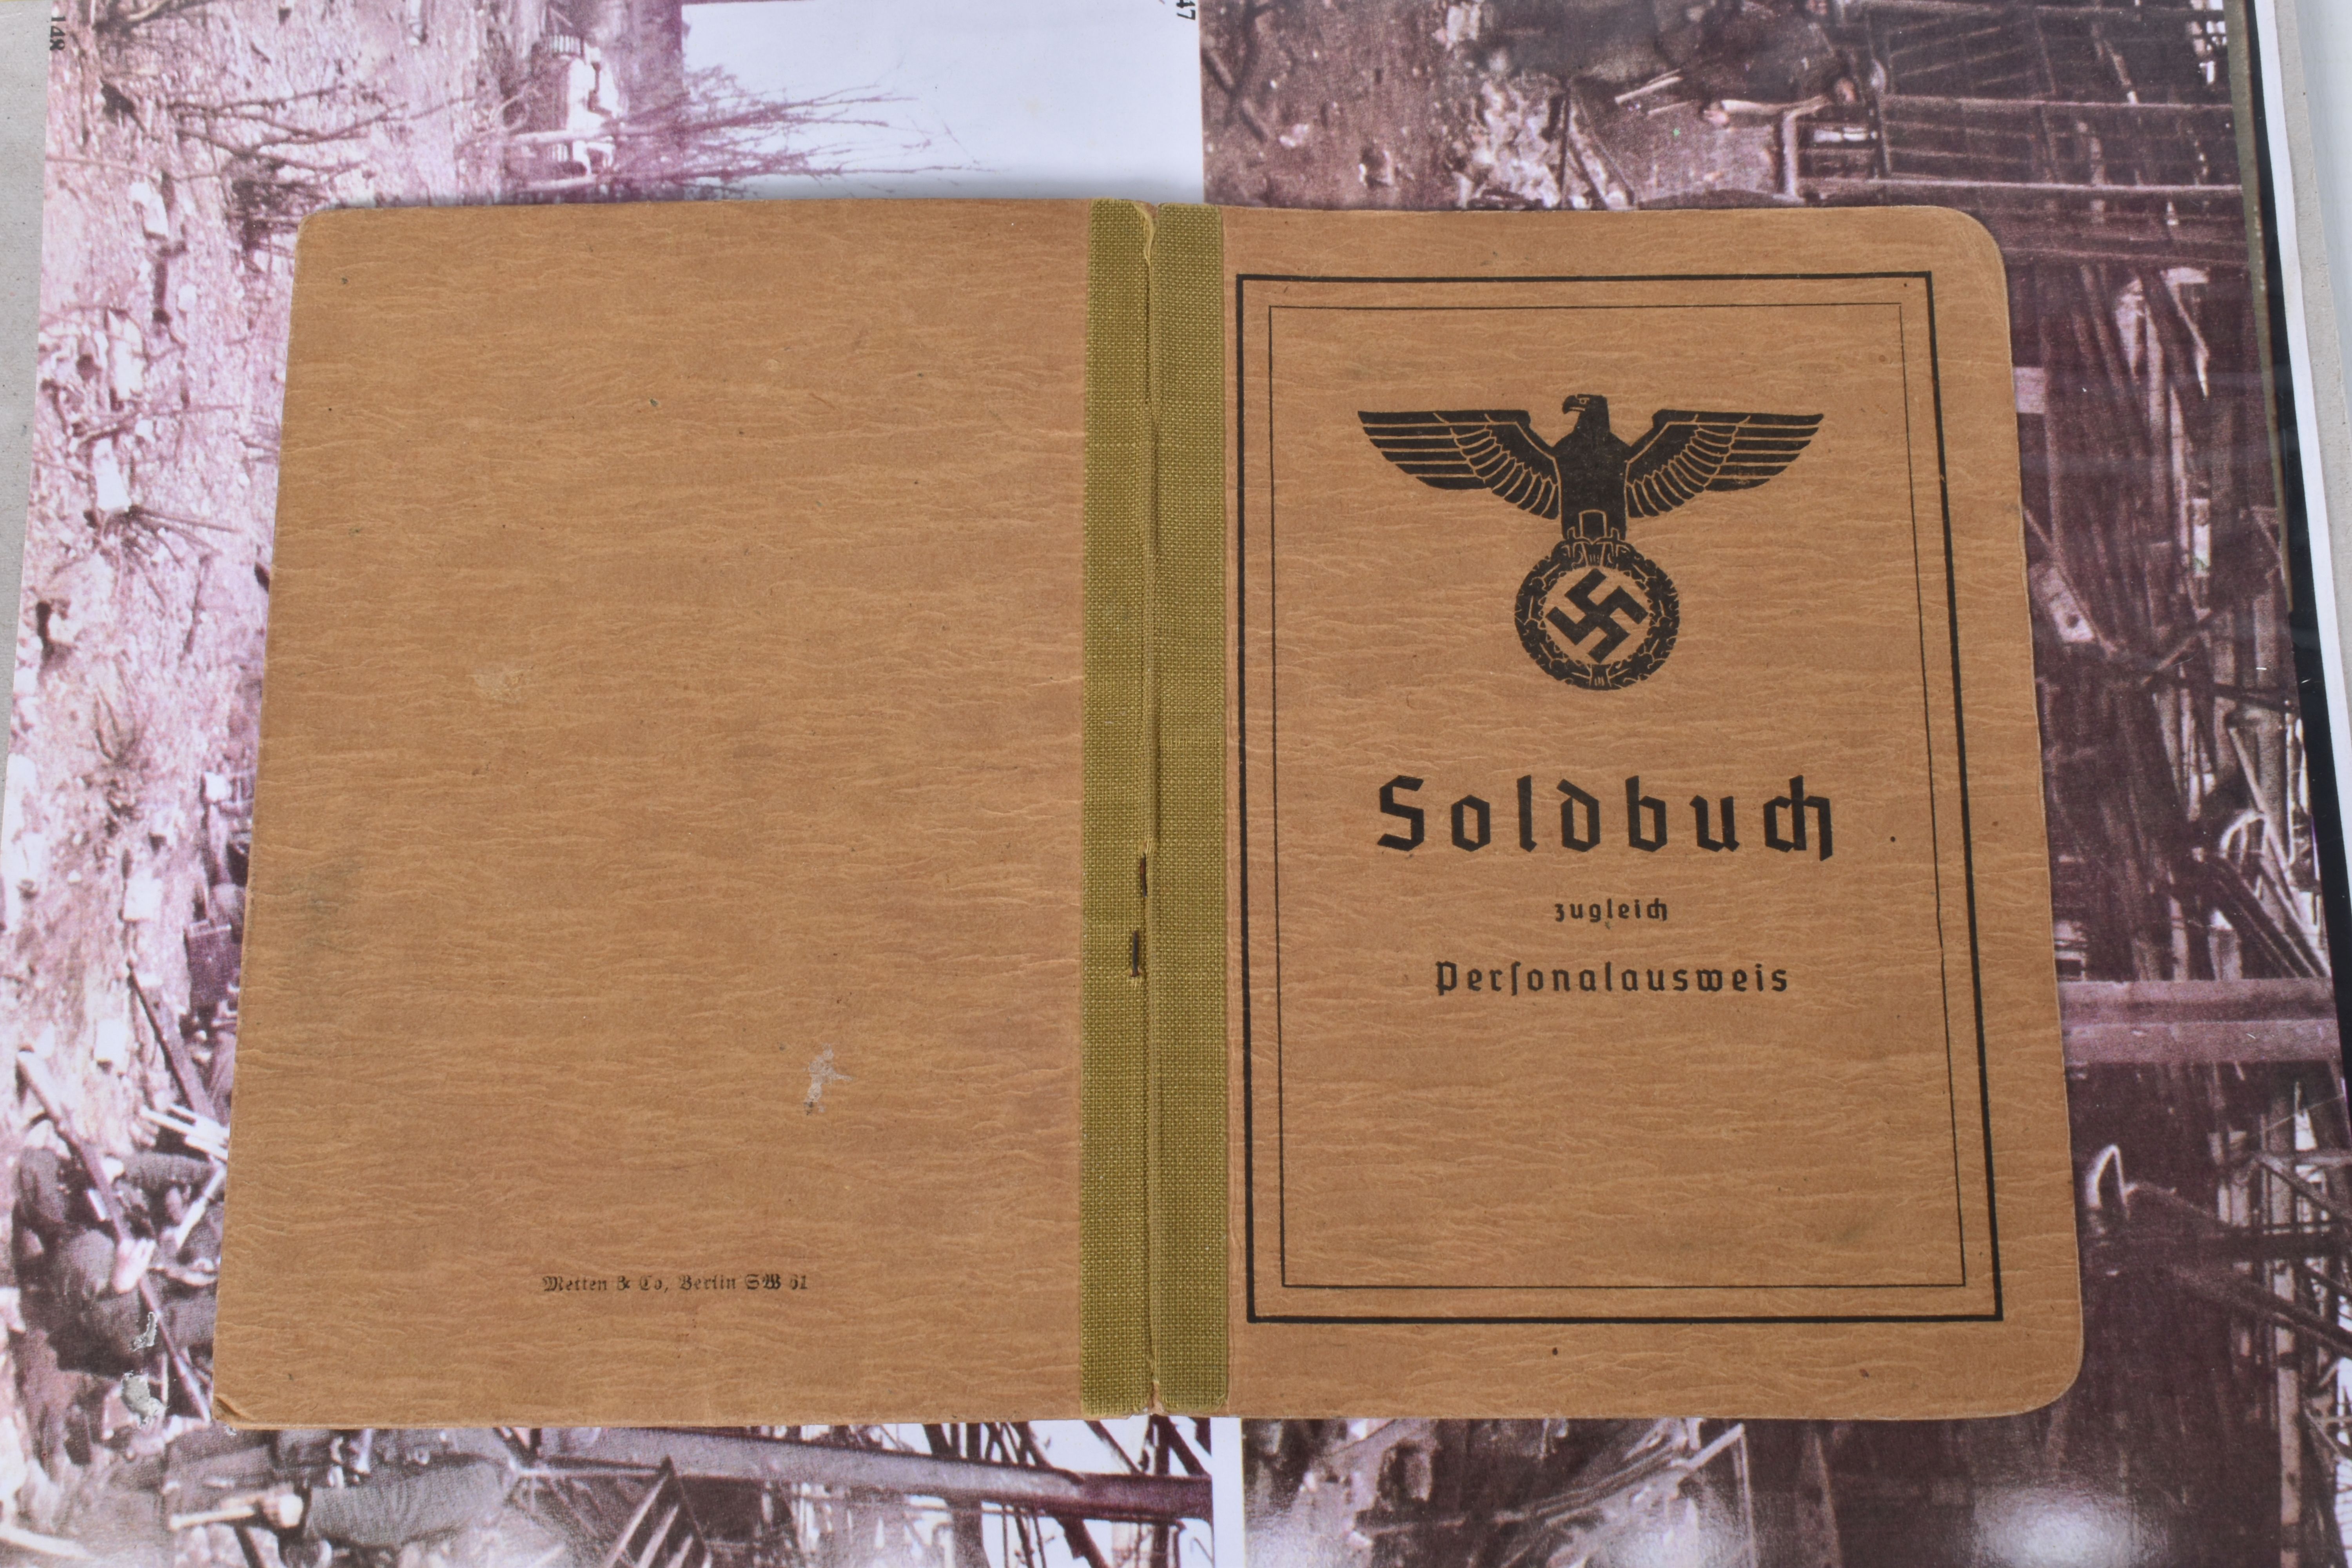 WALTER MEYER, SERGEANT, INCLUDES SOLDBUCH, photos, maps, and articles, red X through the Soldbuch - Image 16 of 24